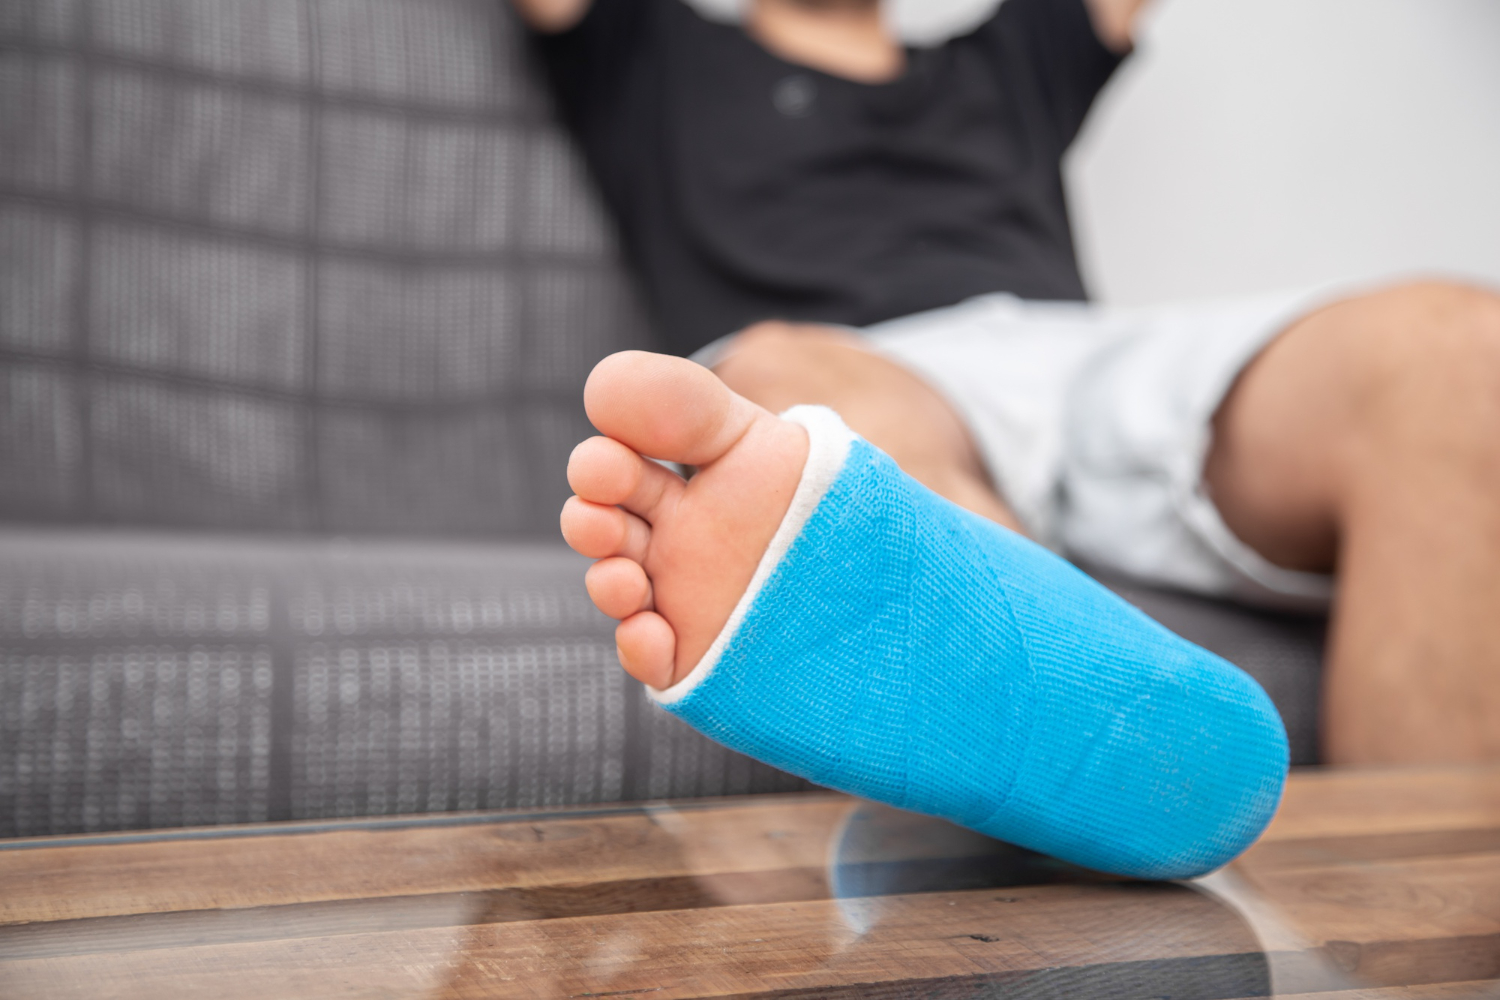 Close up of man with broken leg in cast on couch at home. sports injury concept. Leg cast and toes after injury fracture, dislocation, sprain. Human healthcare and medicine concept. Fractures and sprains.